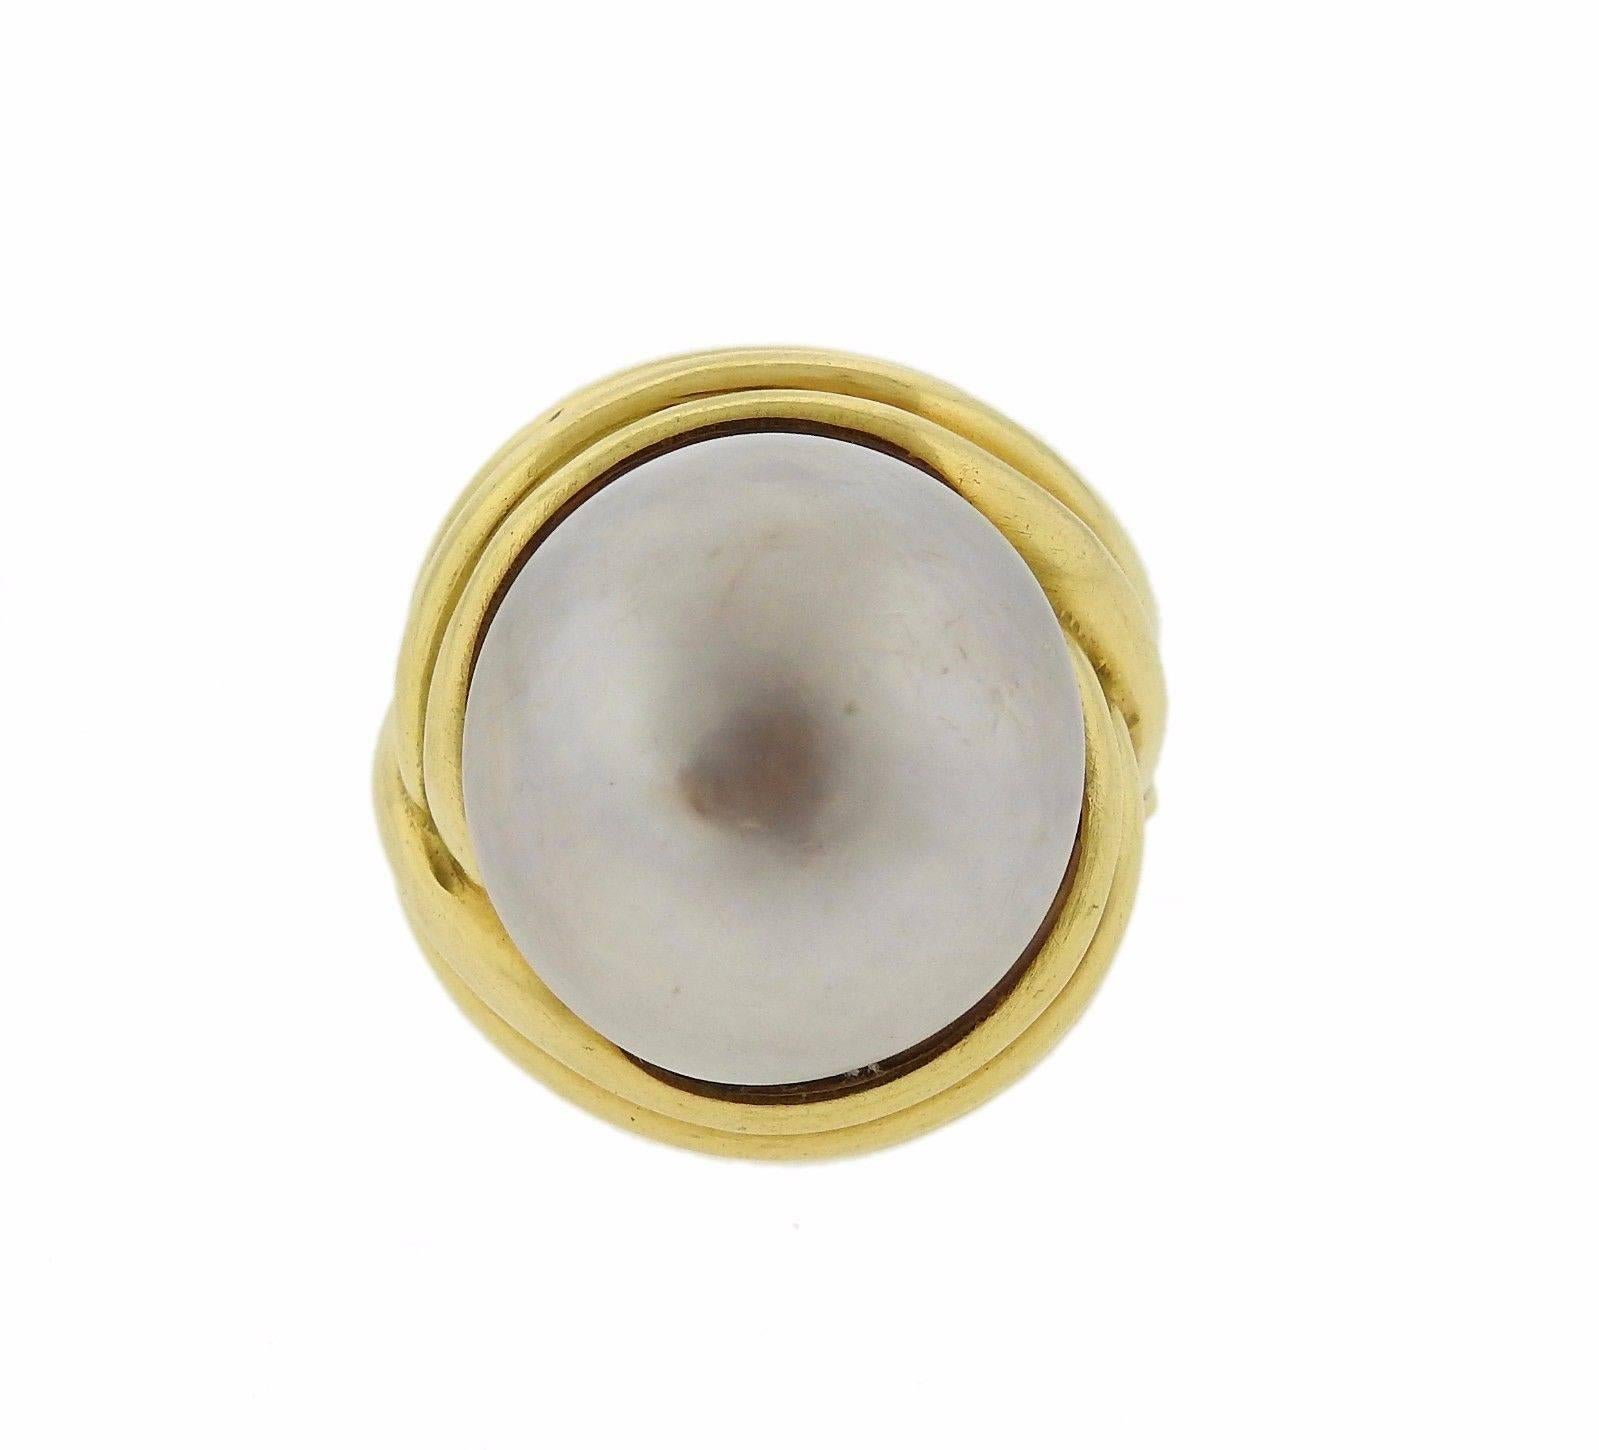 An 18k yellow gold ring set with a 19mm mabe pearl.  The ring is a size 8 weighs 23.3 grams.  The ring top is 25mm wide and sits 20mm from the top of the finger.  Marked: A.Clunn, 18k.